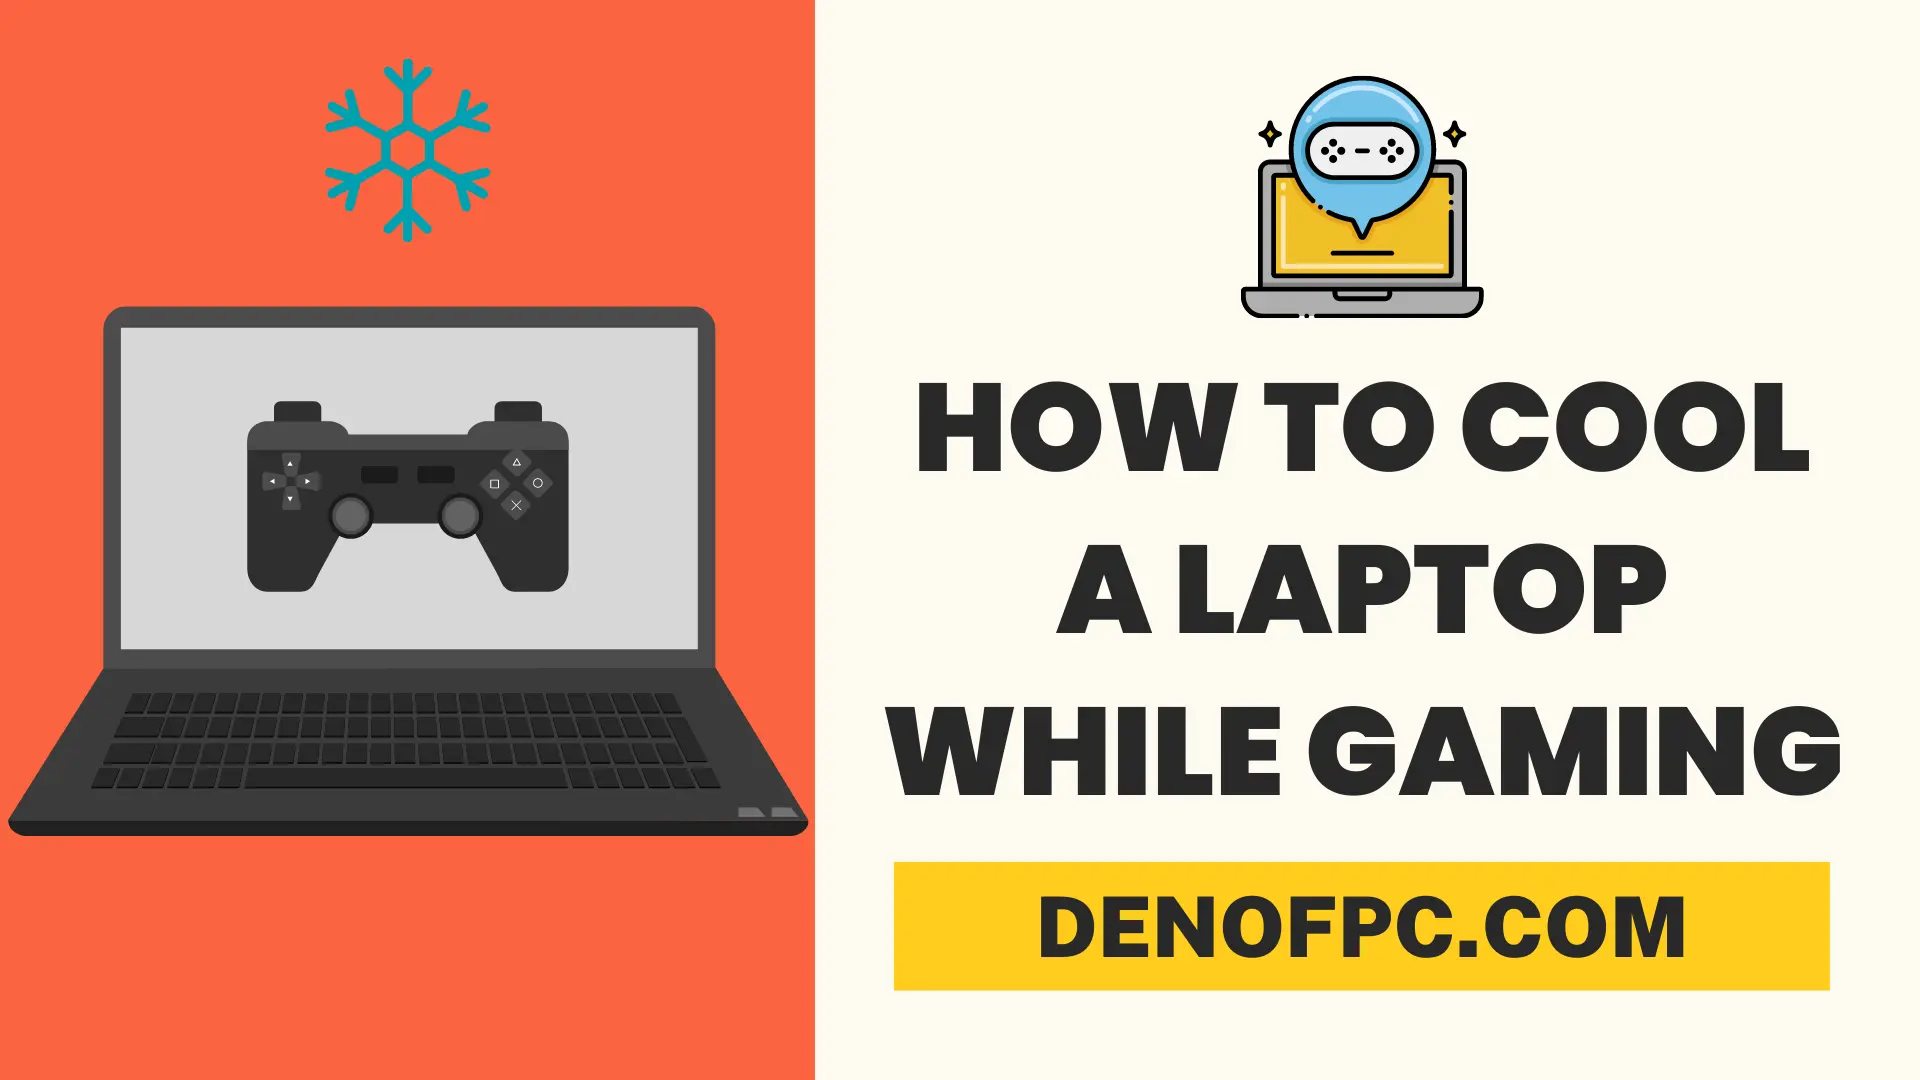 How to Cool a Laptop While Gaming